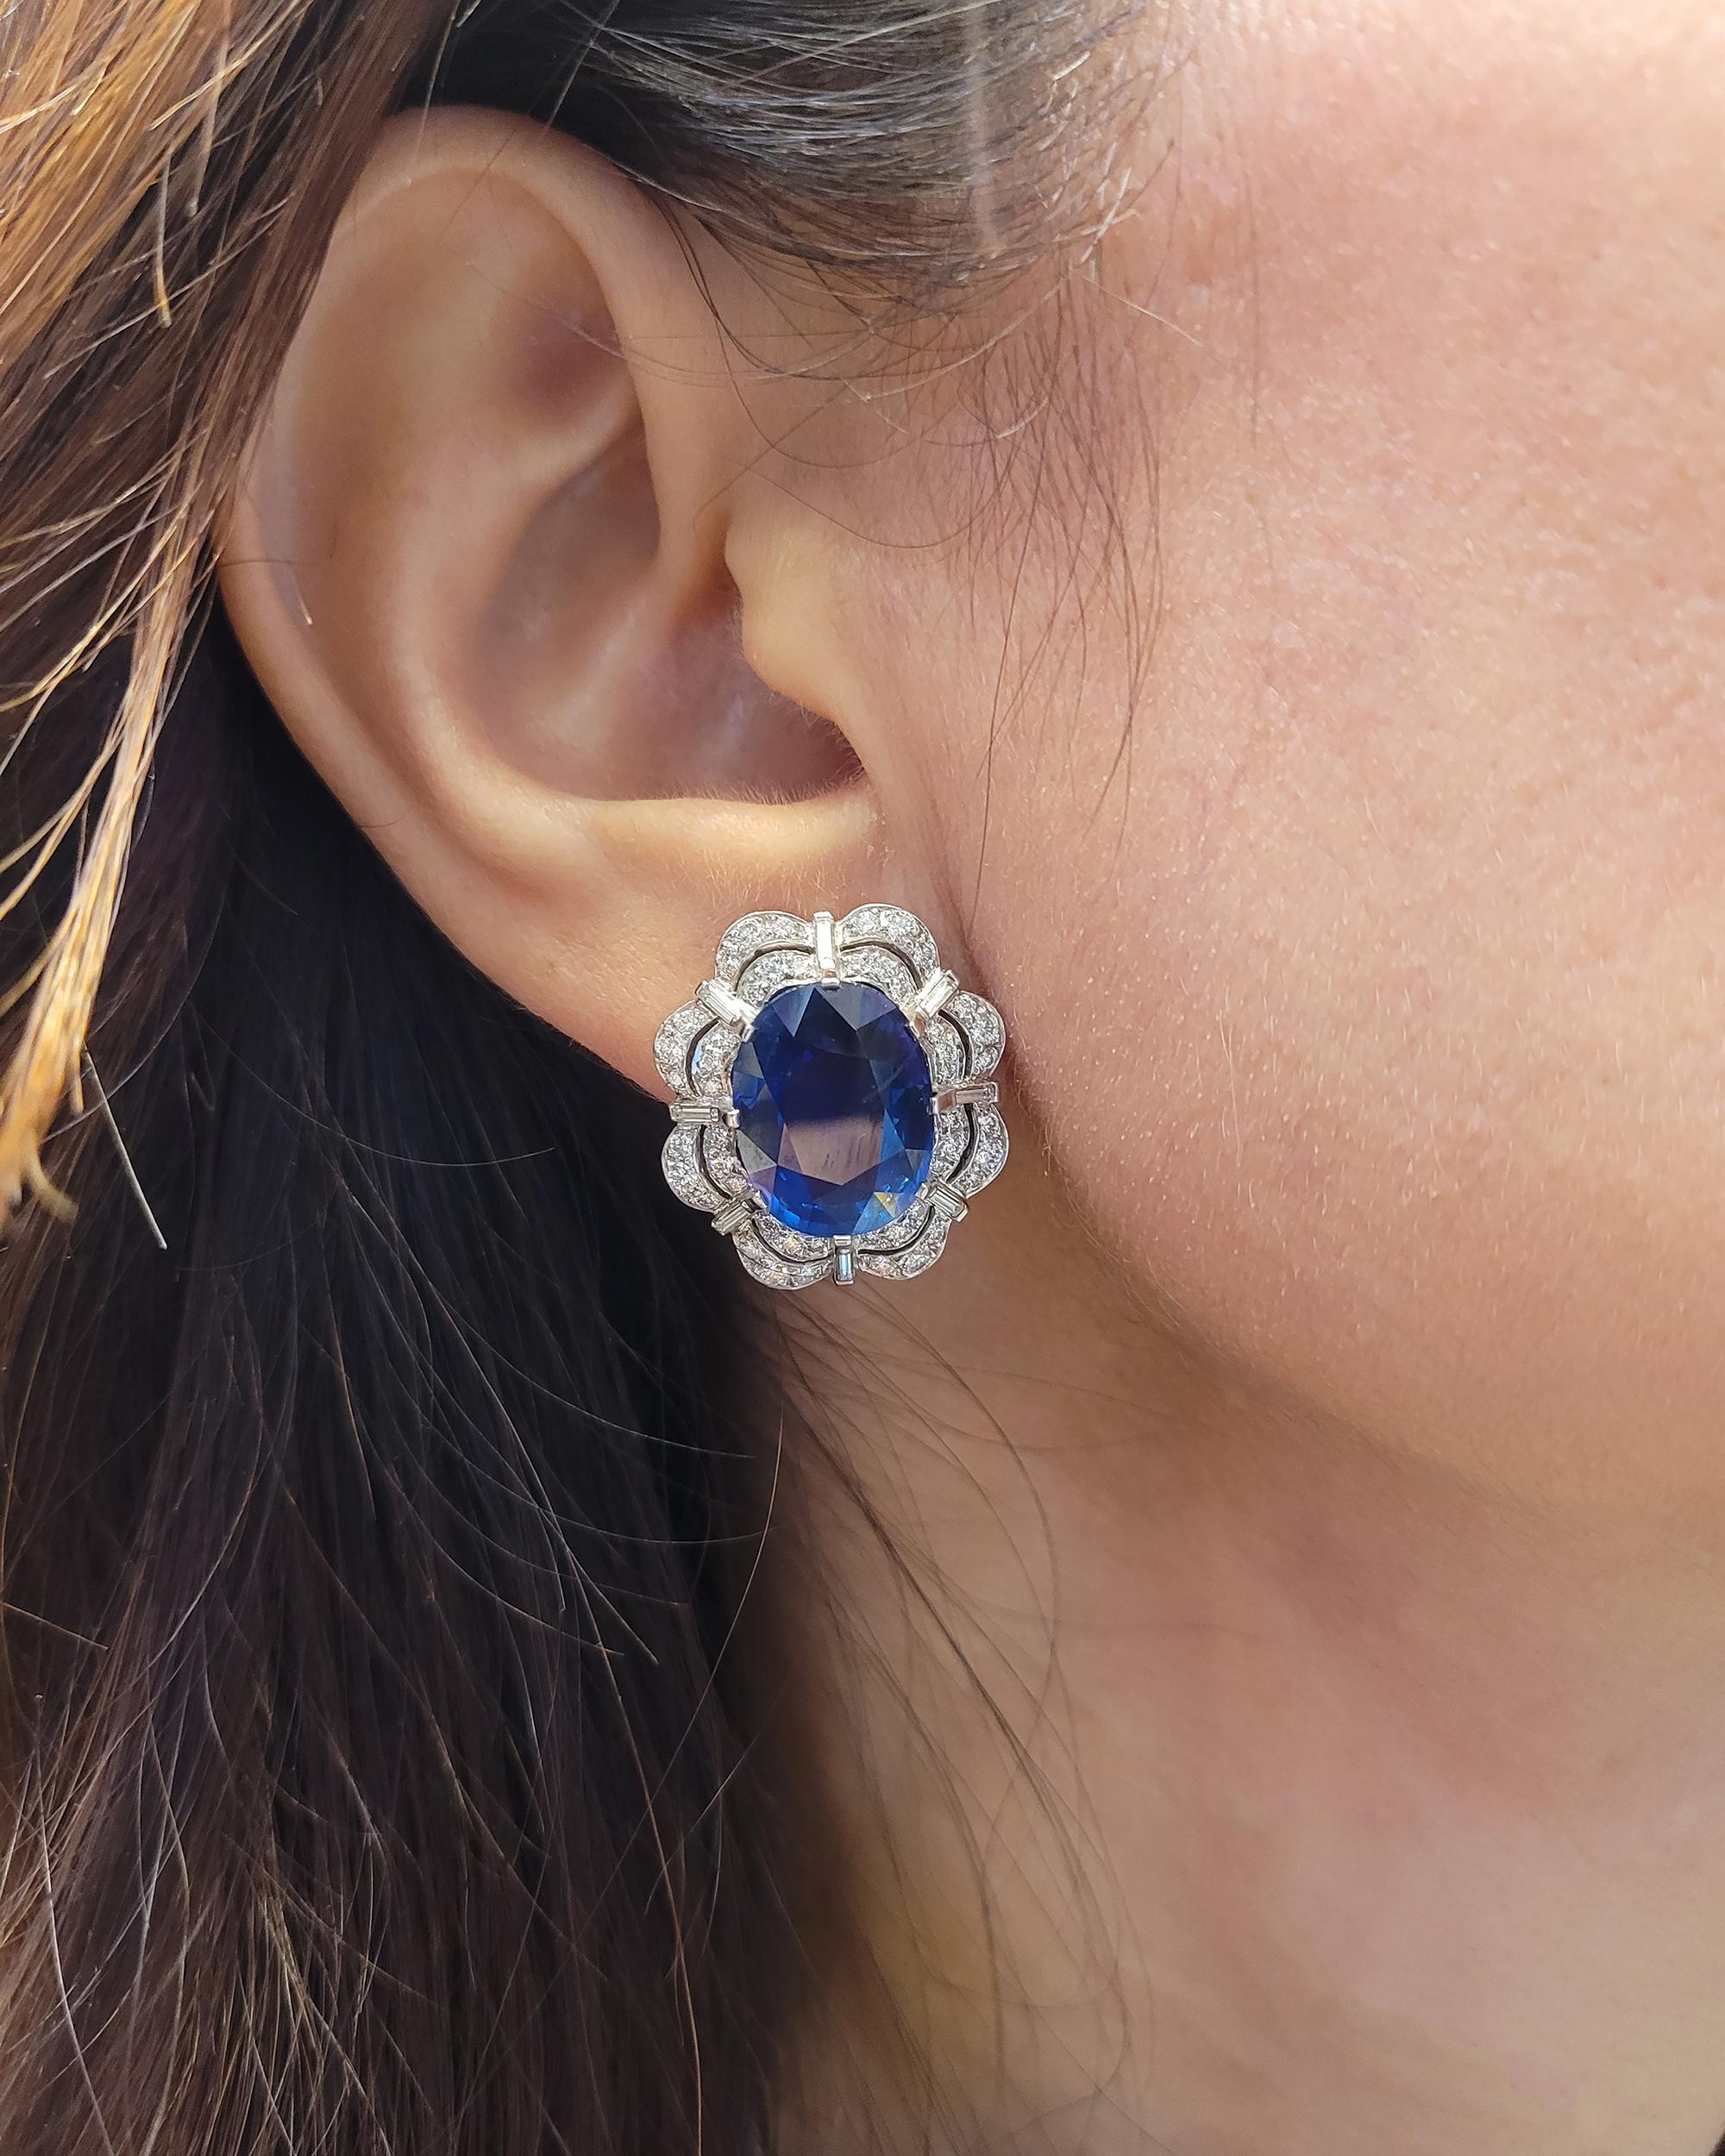 Spectra Fine Jewelry AGL Certified 21.28 Carat Sapphire Diamond Earrings In New Condition For Sale In New York, NY